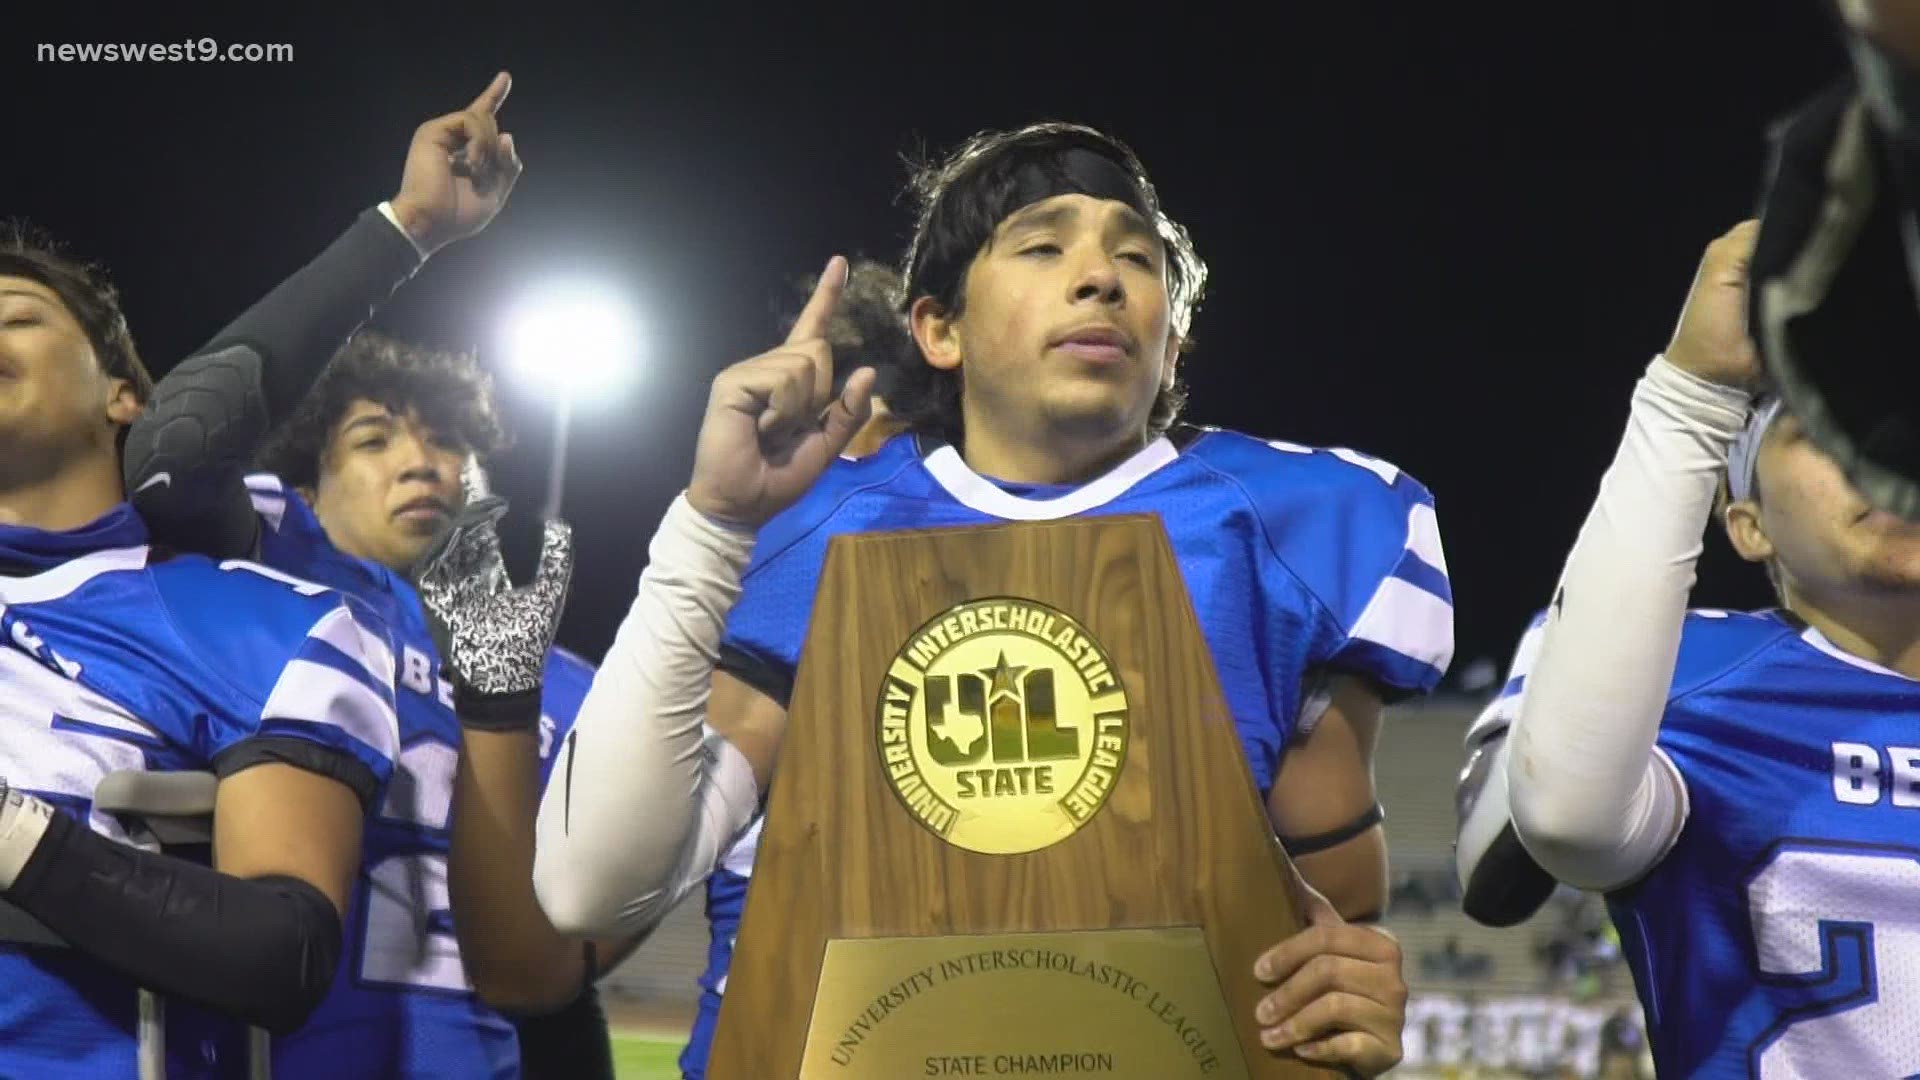 The Balmorhea Bears captured their first state tite in school history